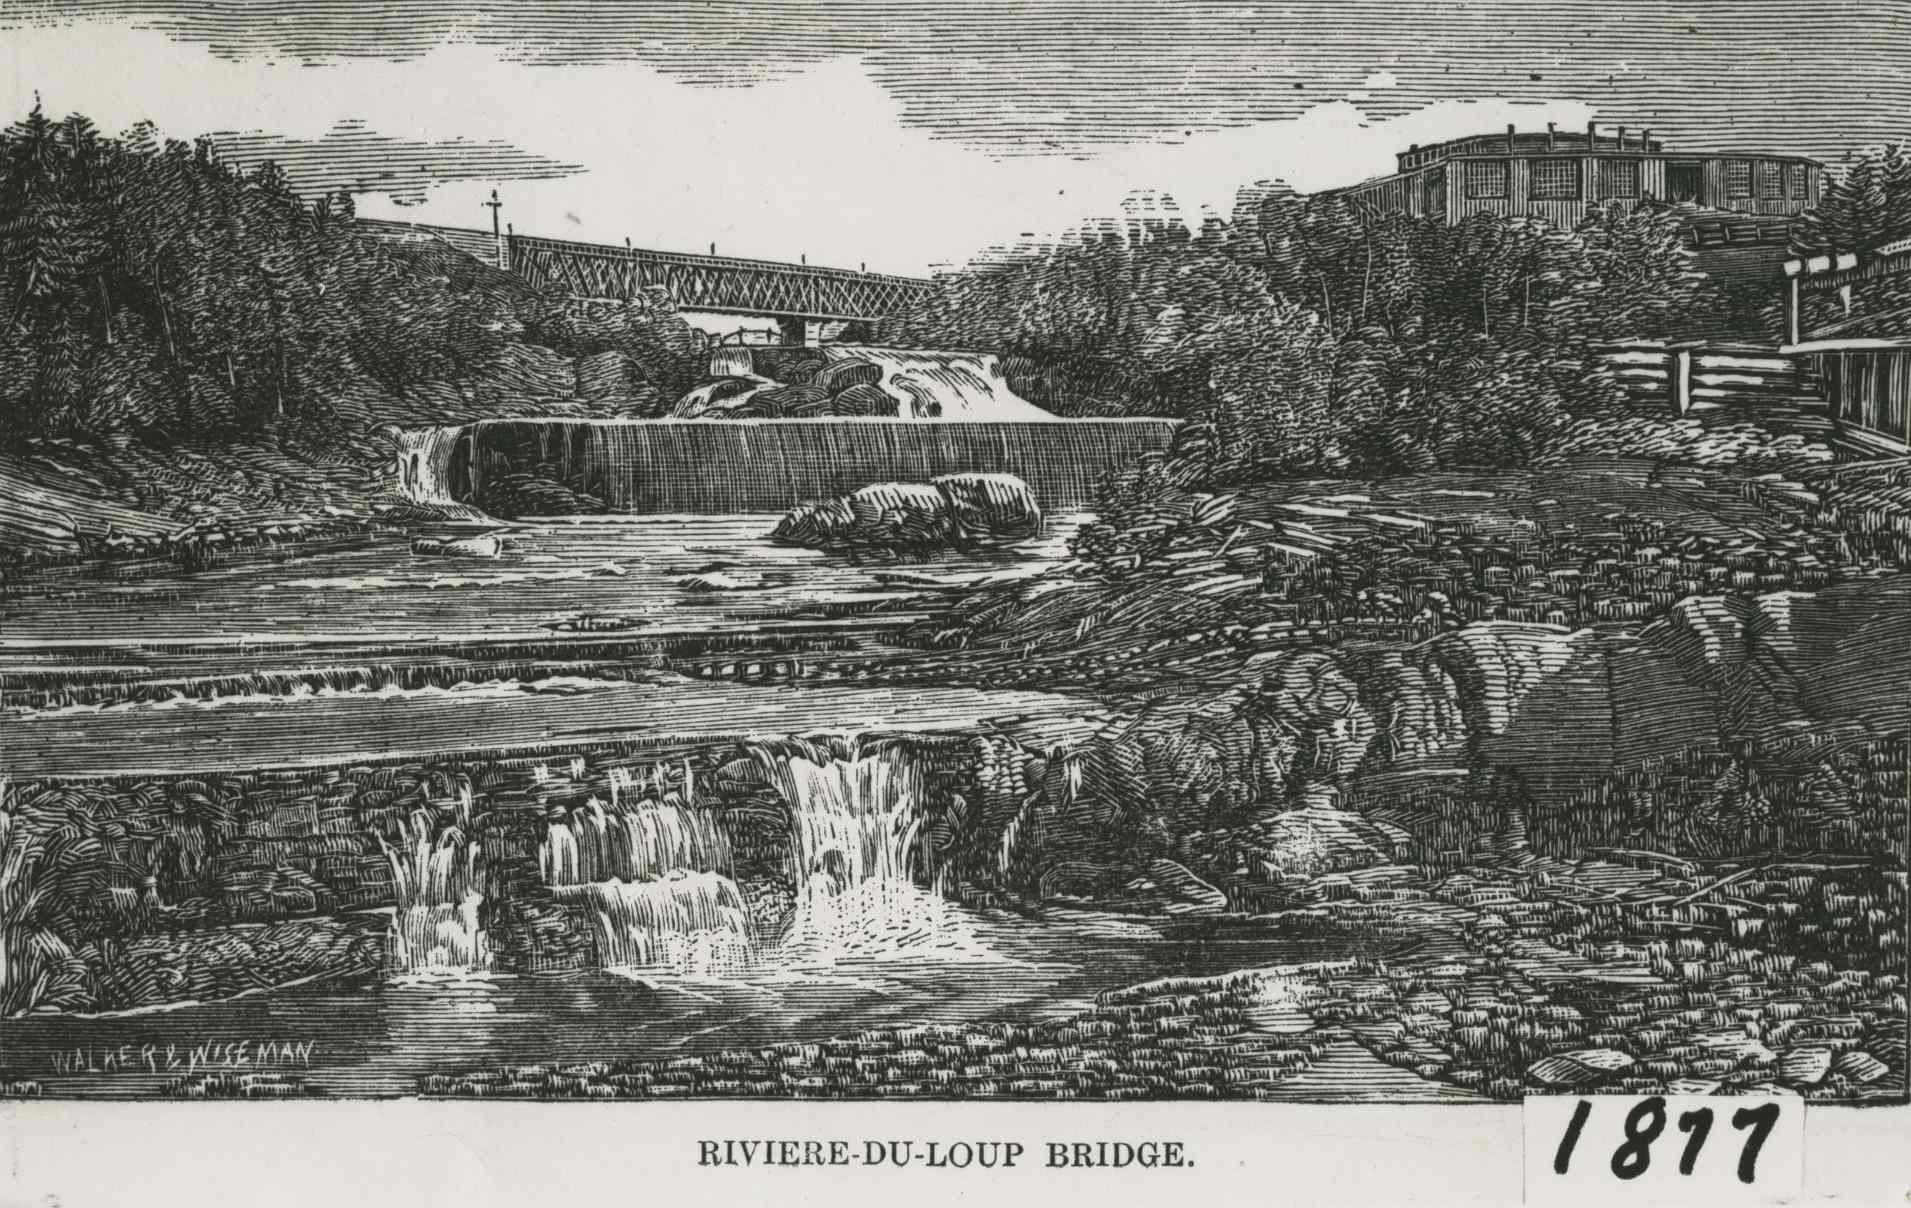 An engraving showing a railroad bridge over a waterfall.